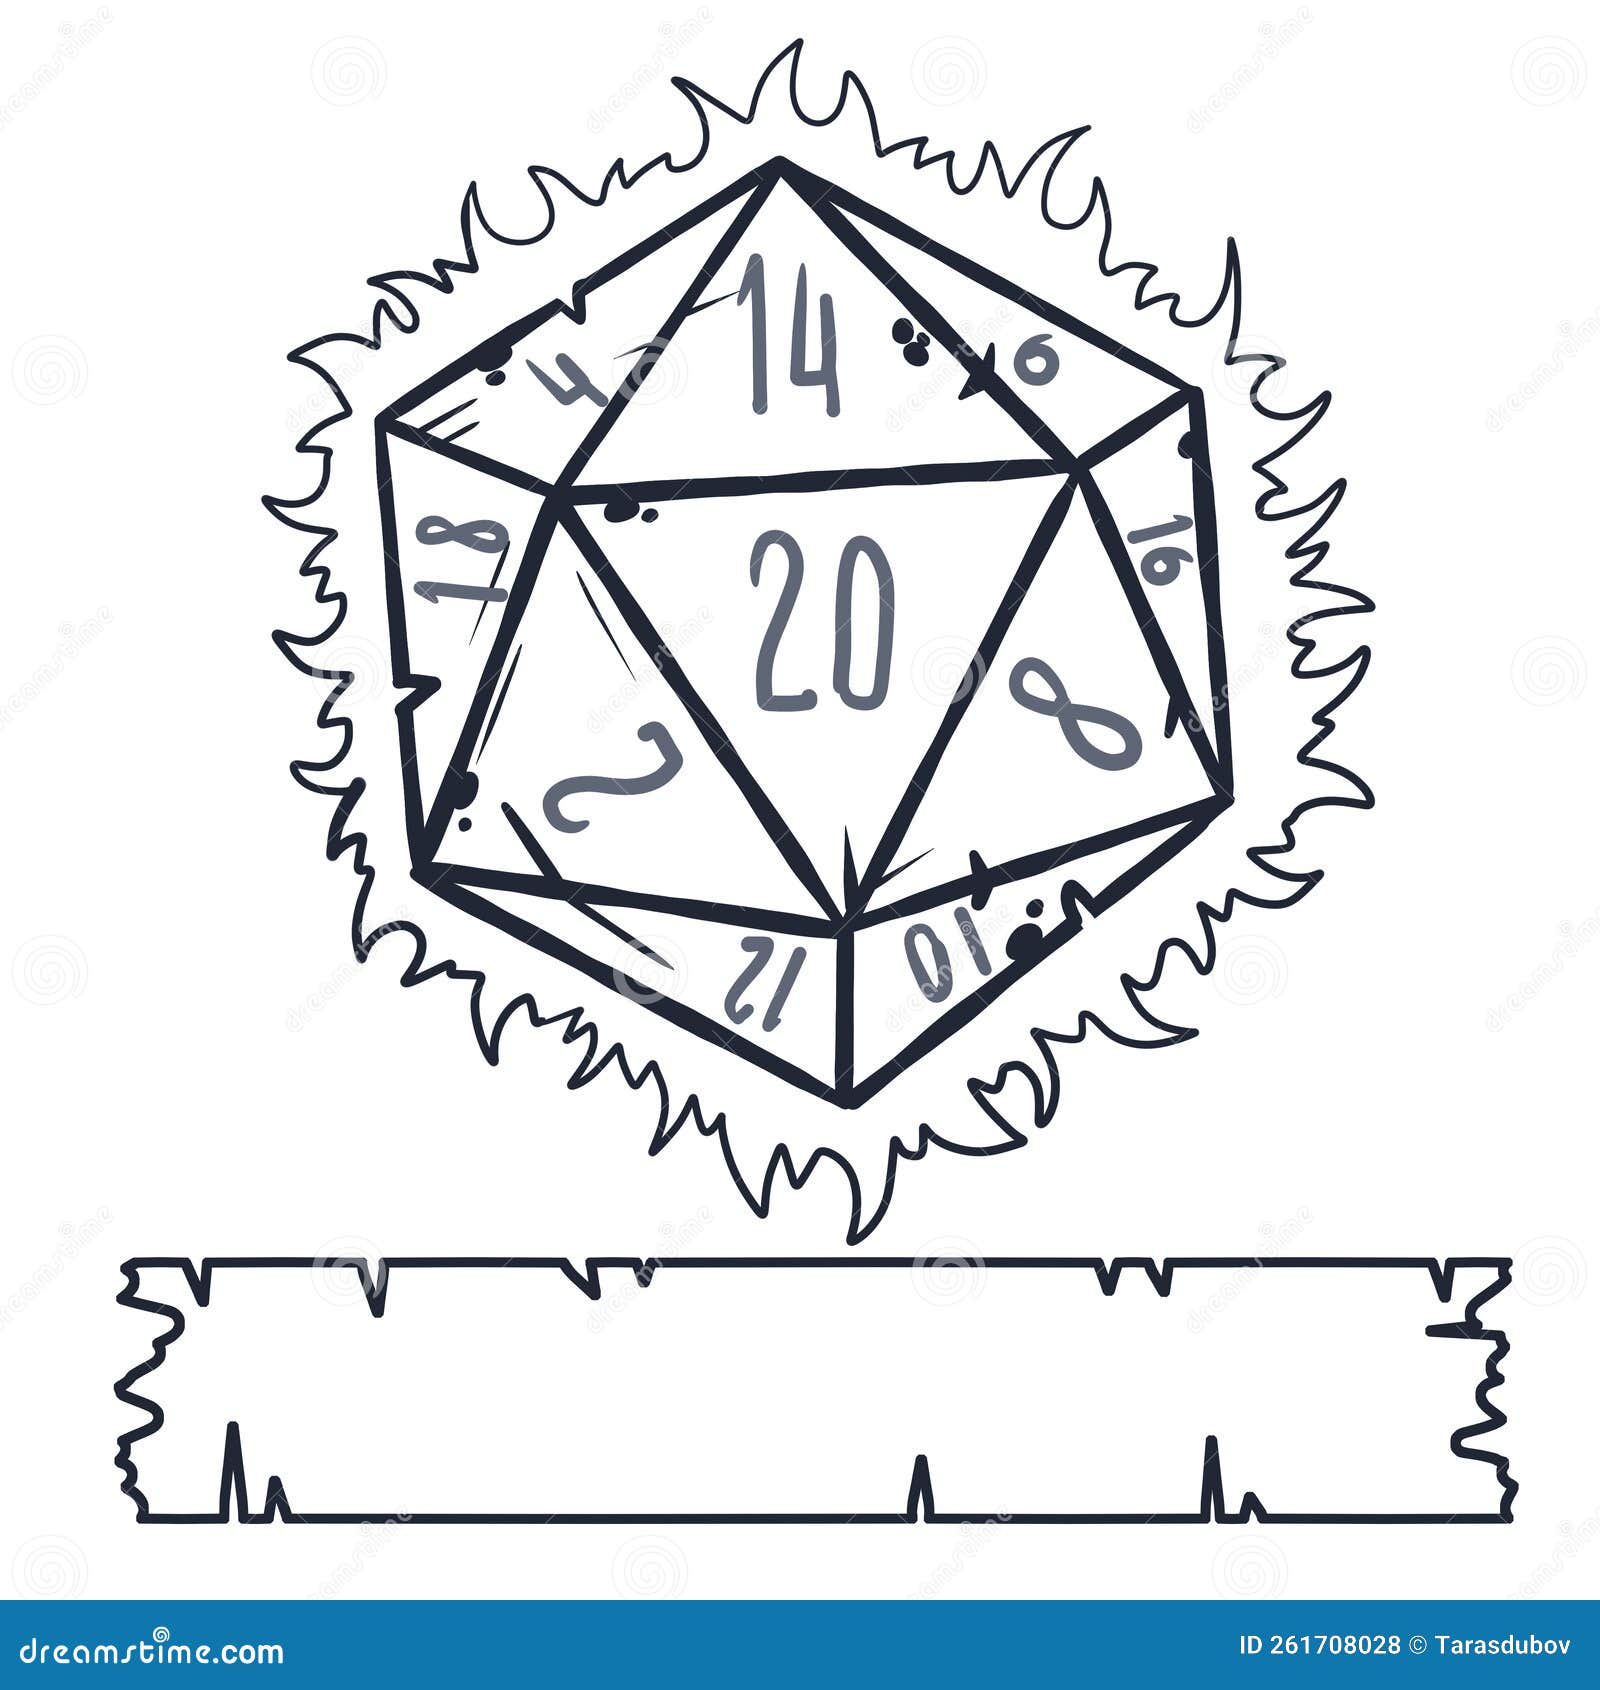 Dice d20 for playing dnd Royalty Free Vector Image